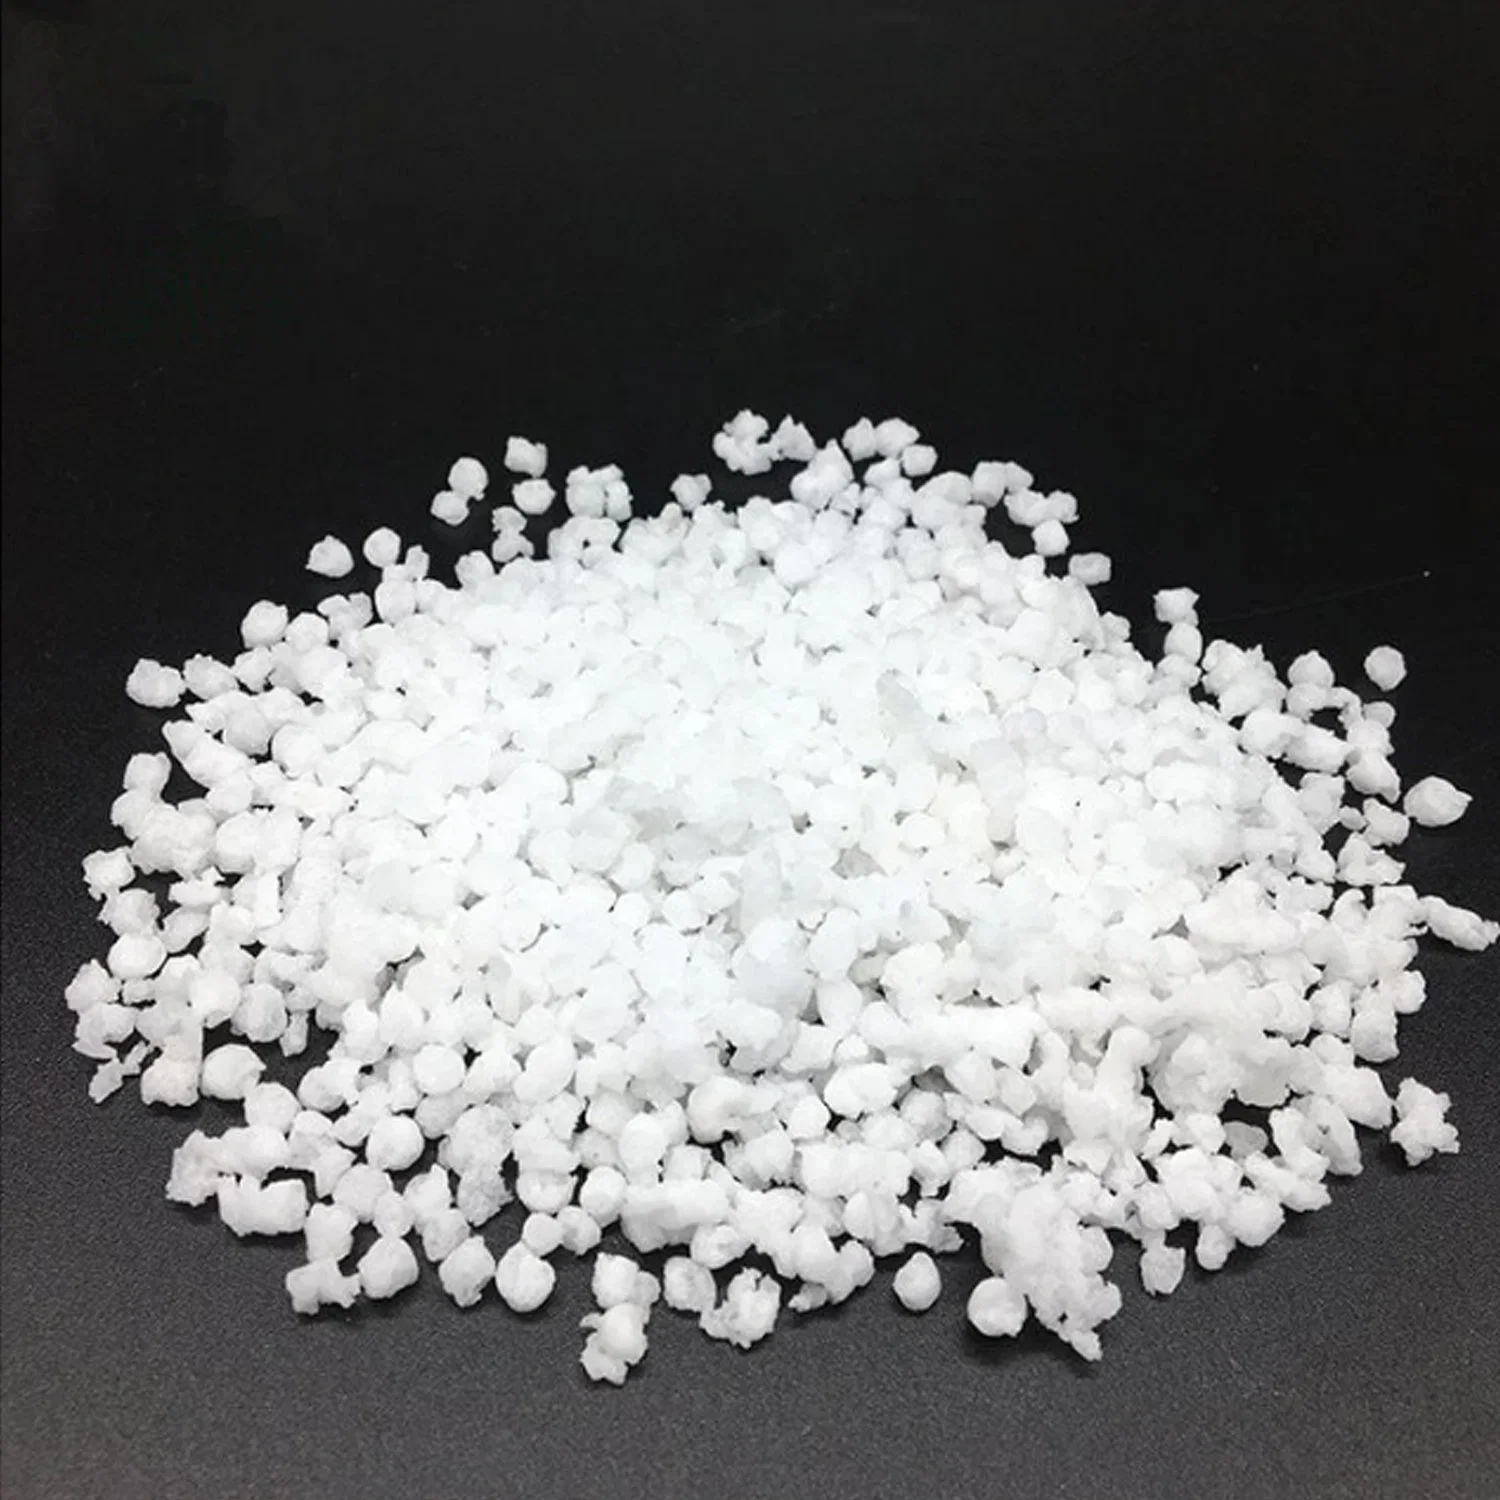 Sbs Thermoplastic Elastomer 3546 Butadiene Styrene Sbs Particles for Rubber Shoe Adhesive